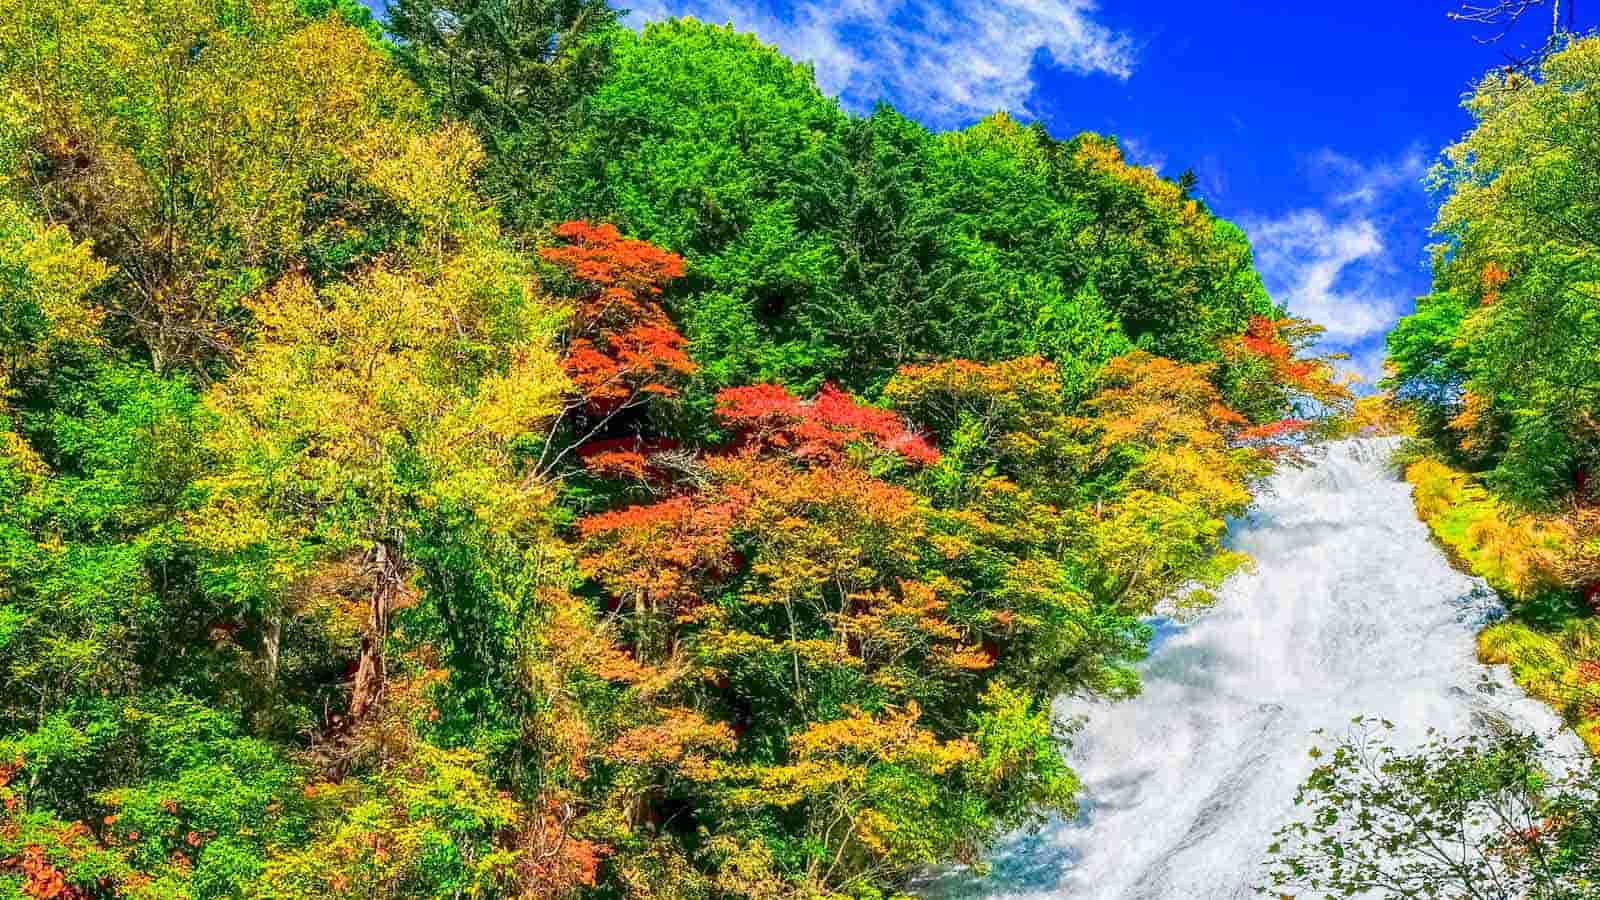 Autumn Colors in Nikko: 12 Places that will Take Your Breath Away